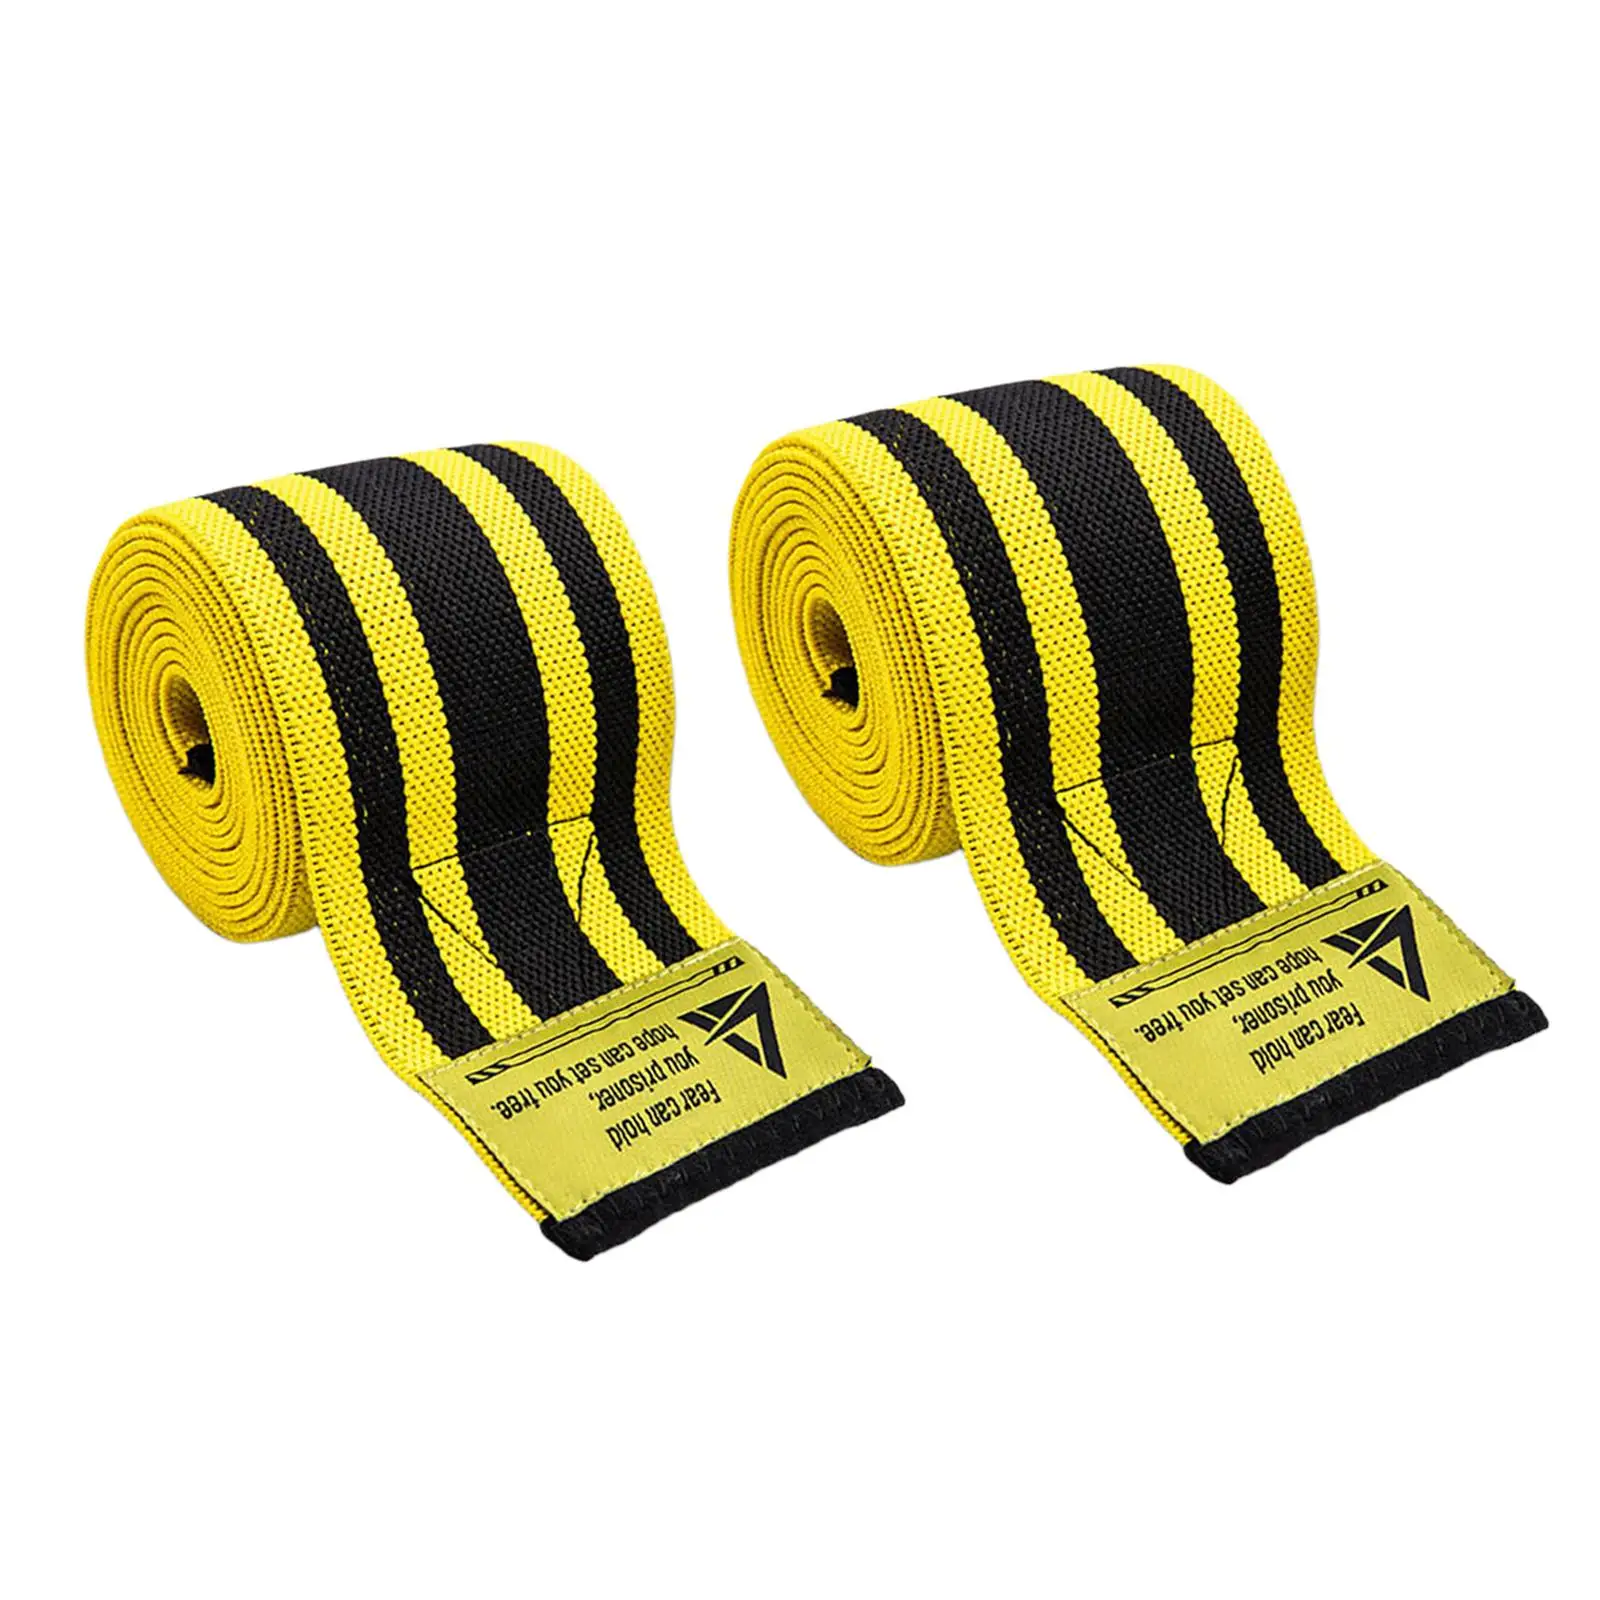 Knee Wraps Compression and Elastic Support Flexible Knee Support for Cable